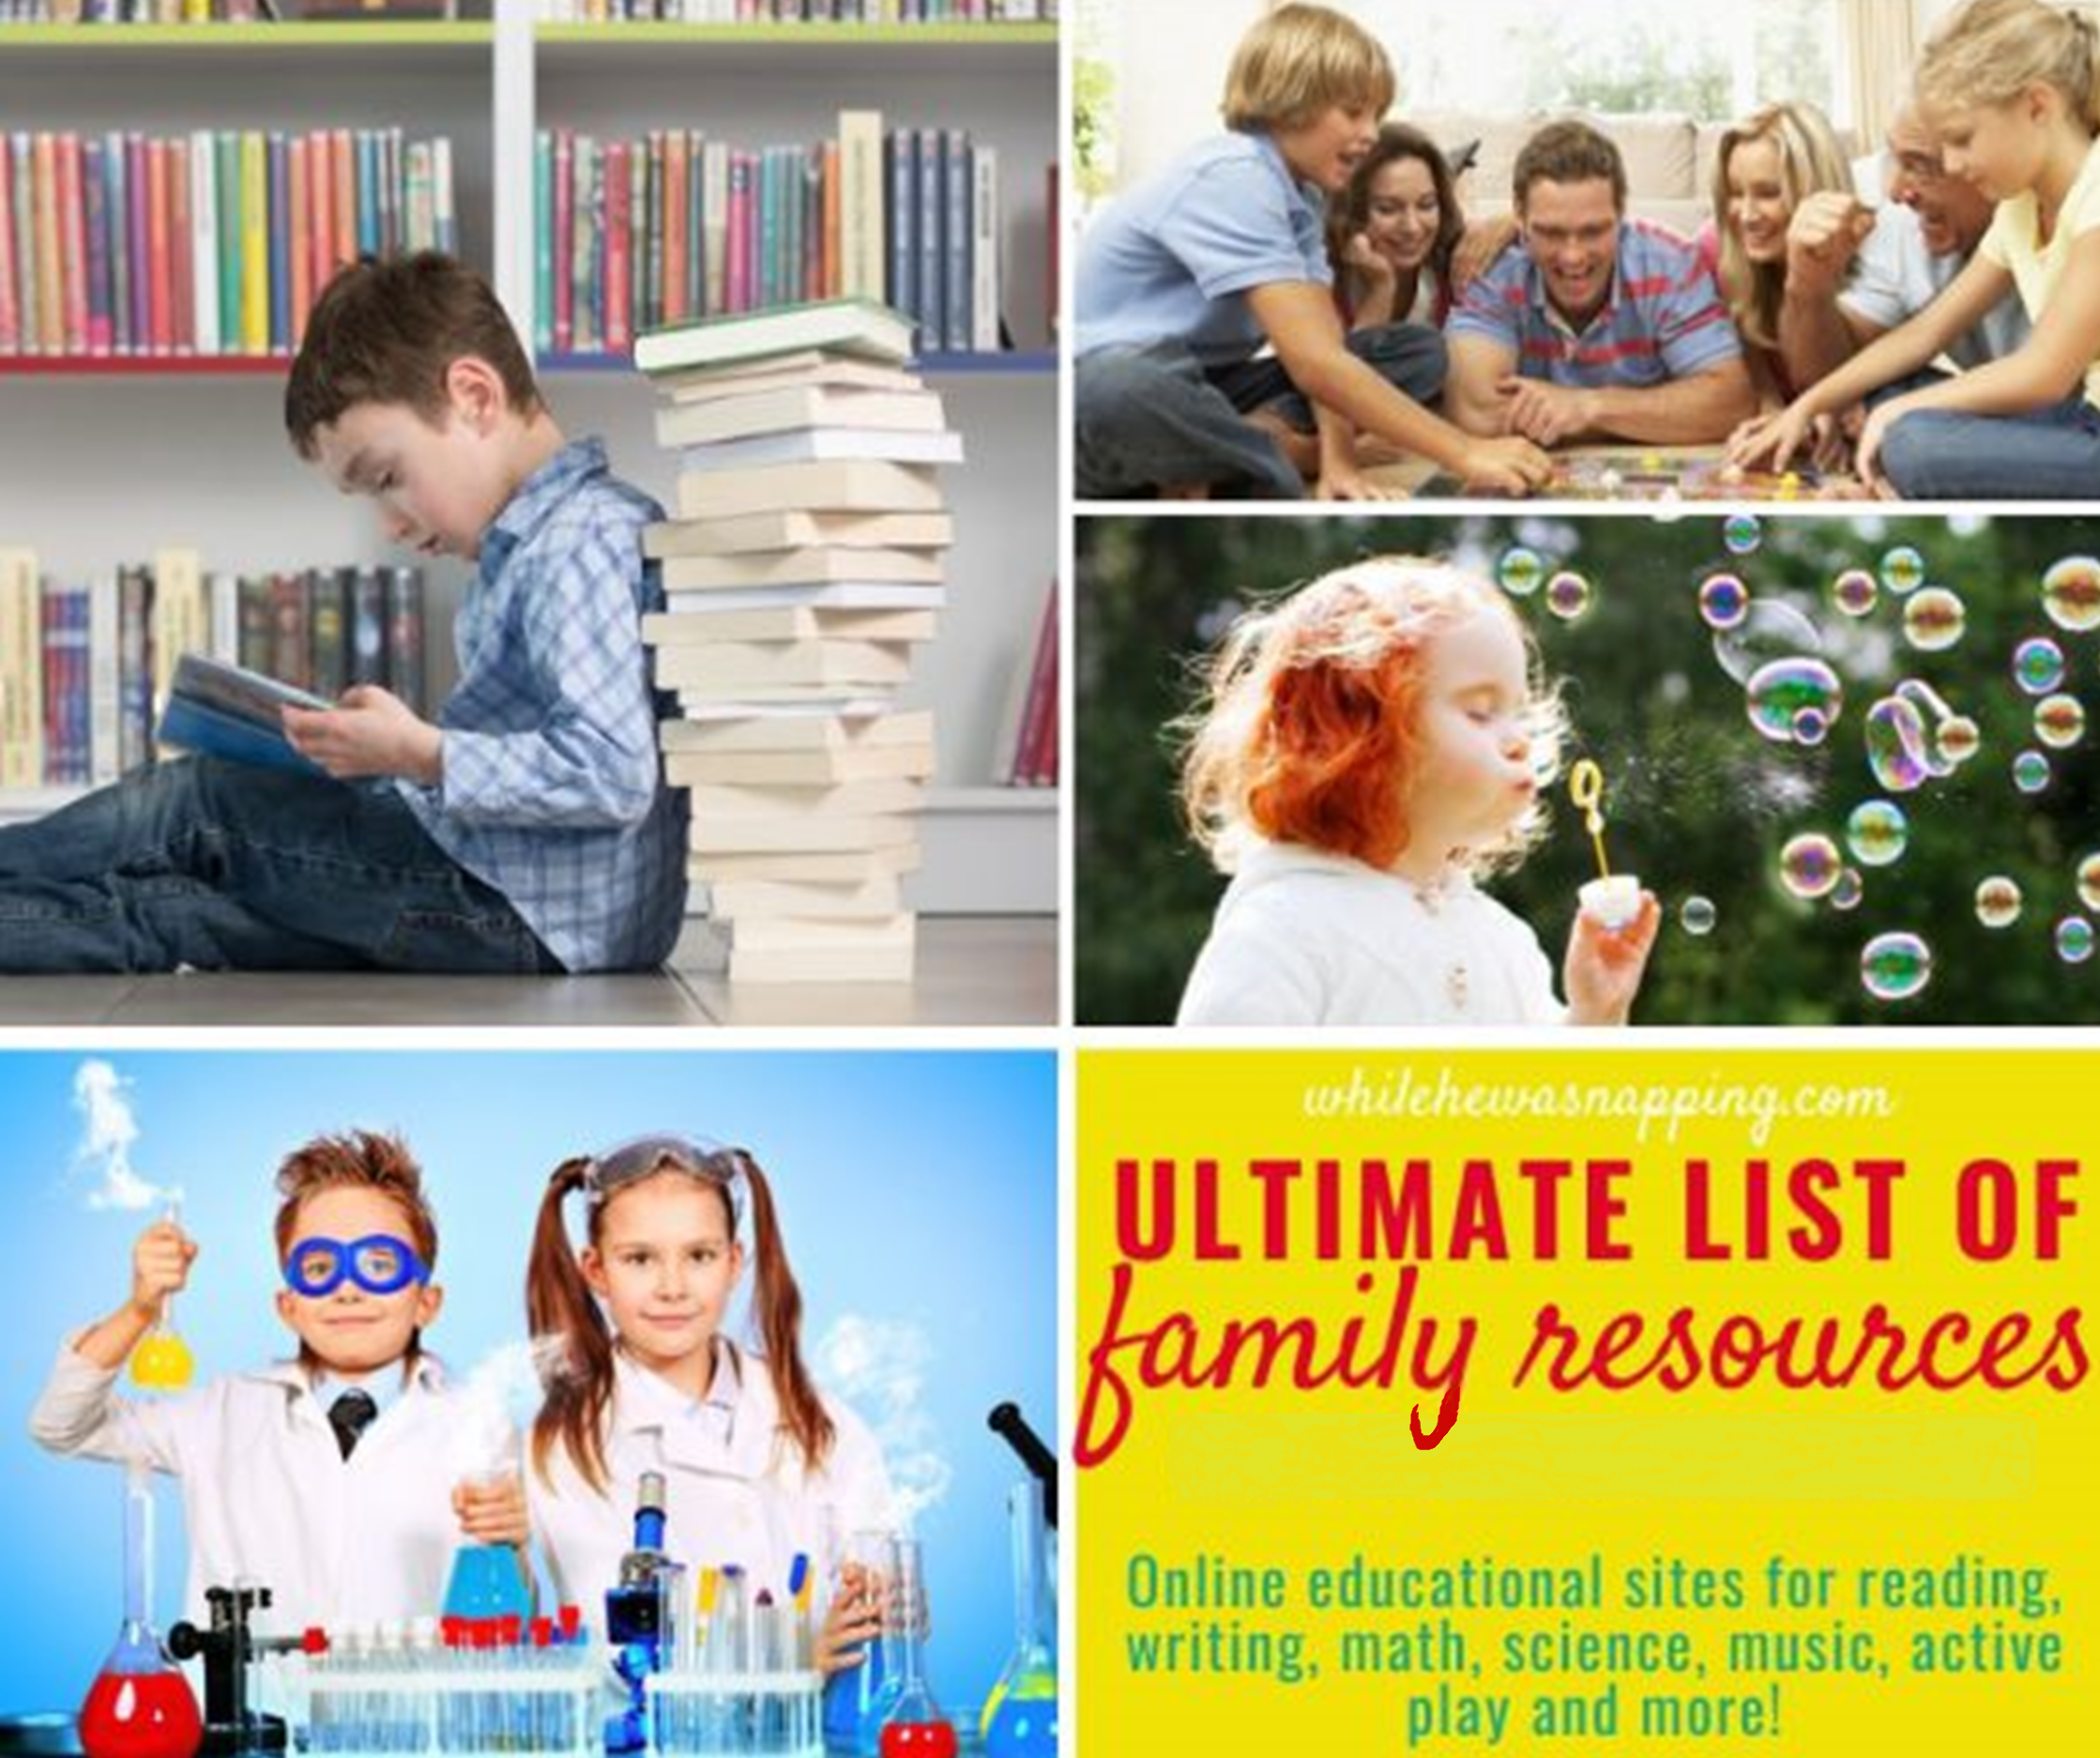 Resources for Homeschooling your Child